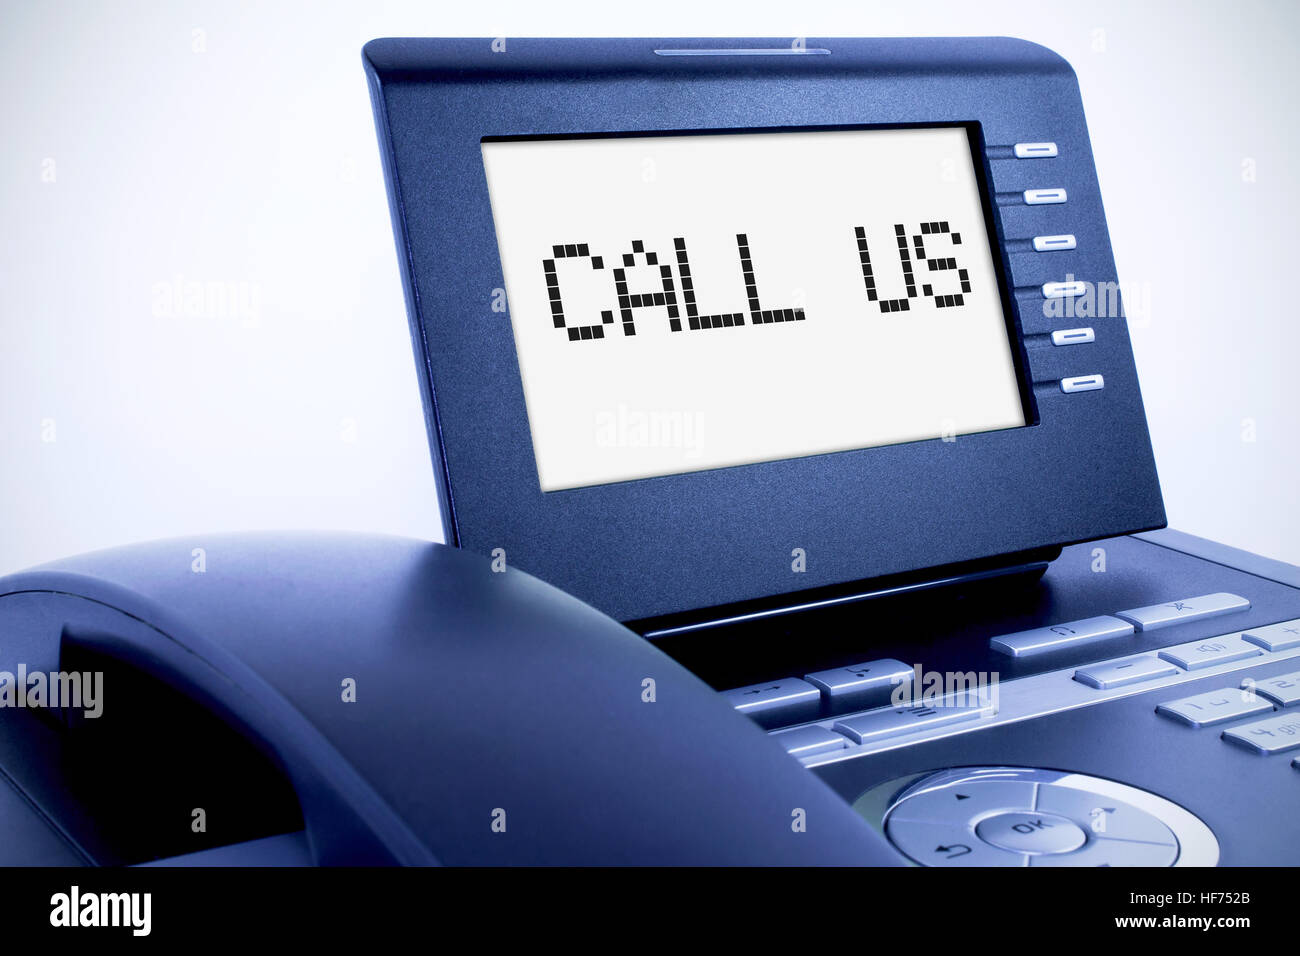 Modern phone with a display sign 'Call Us' Stock Photo